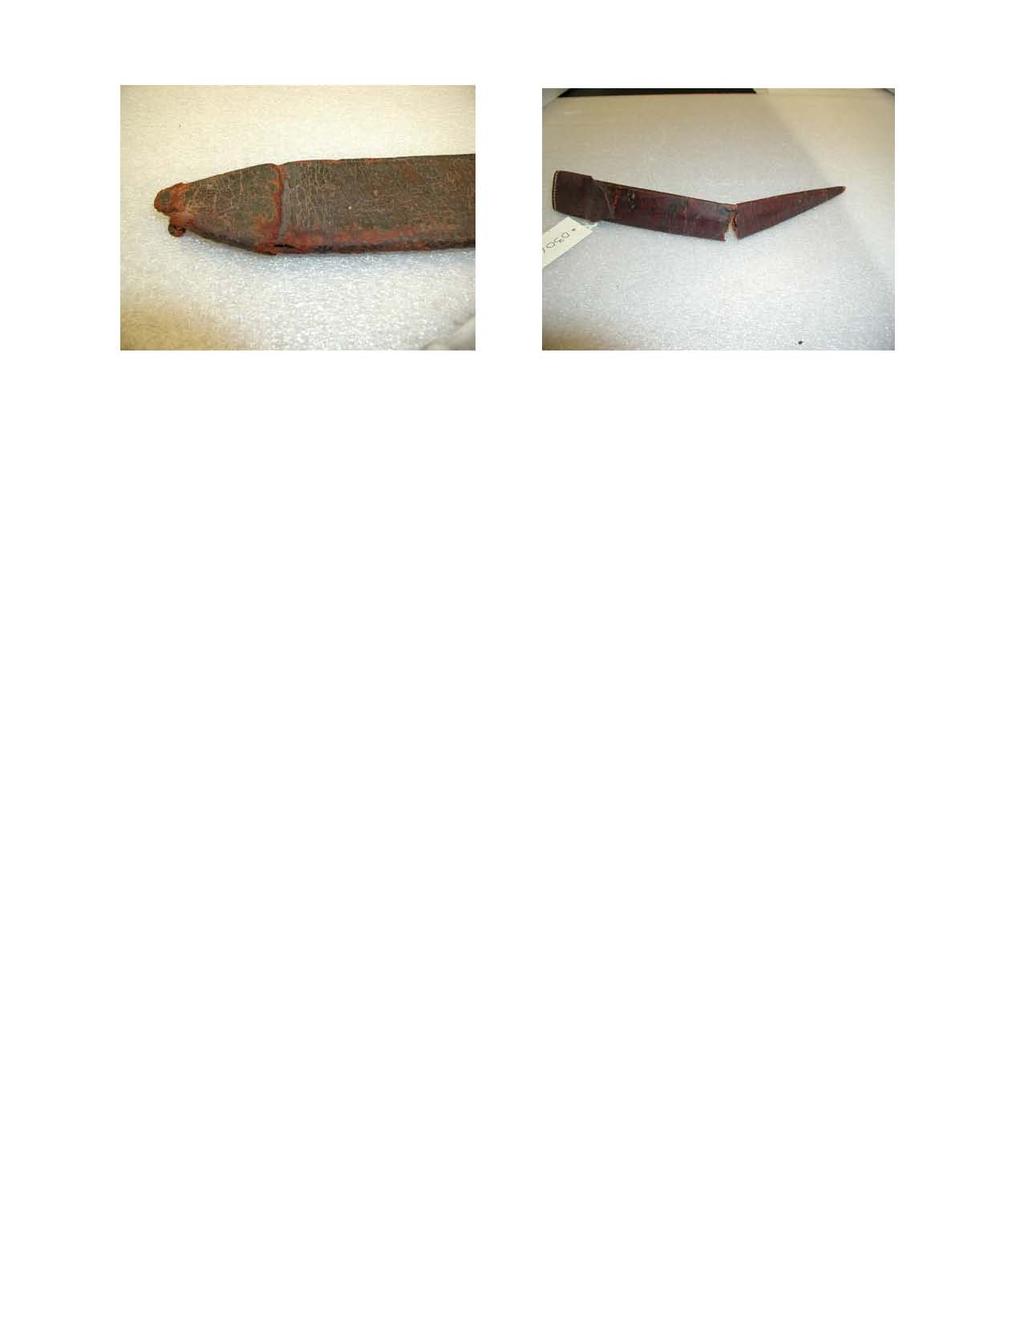 Figure 9. Detail of leather scabbard showing red-rot condition. This condition will require further treatment and was classed as a Priority 1 object. Figure 10.